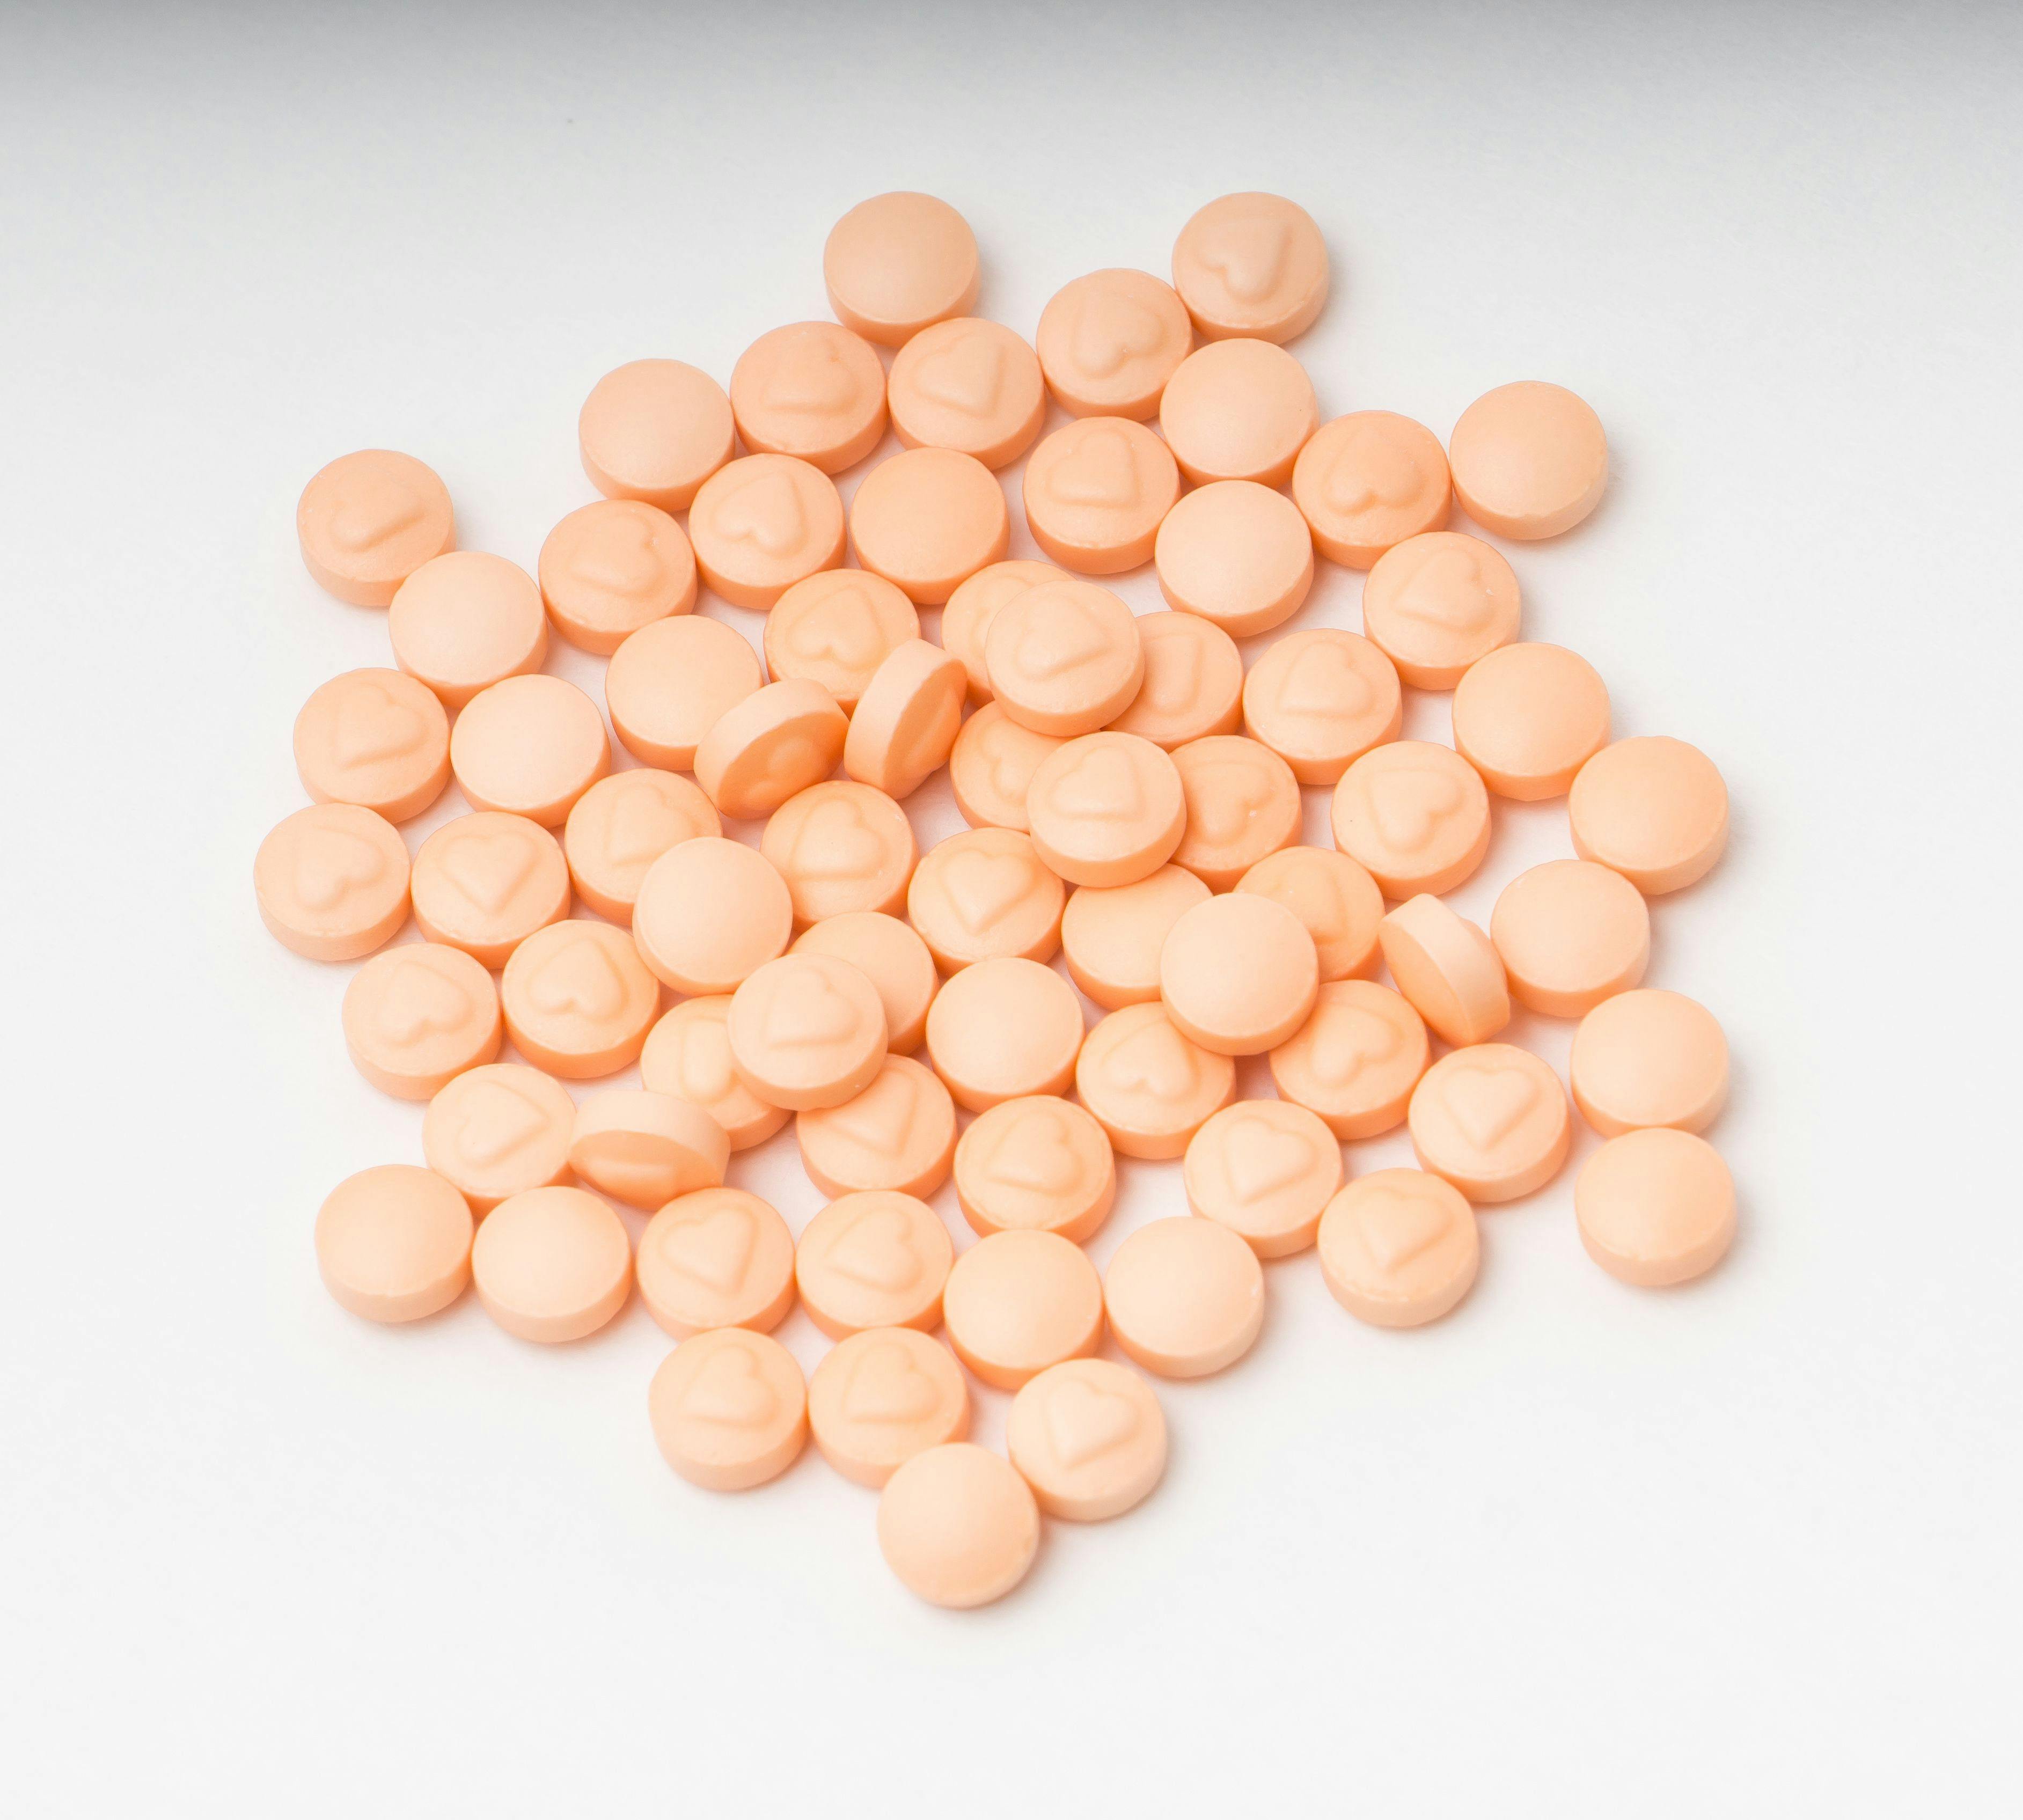 In certain supermarkets, it has been observed that aspirin products labeled as "half-dose" or "daily adult" are available for purchase. Image Credit: © Pomaikai - stock.adobe.com